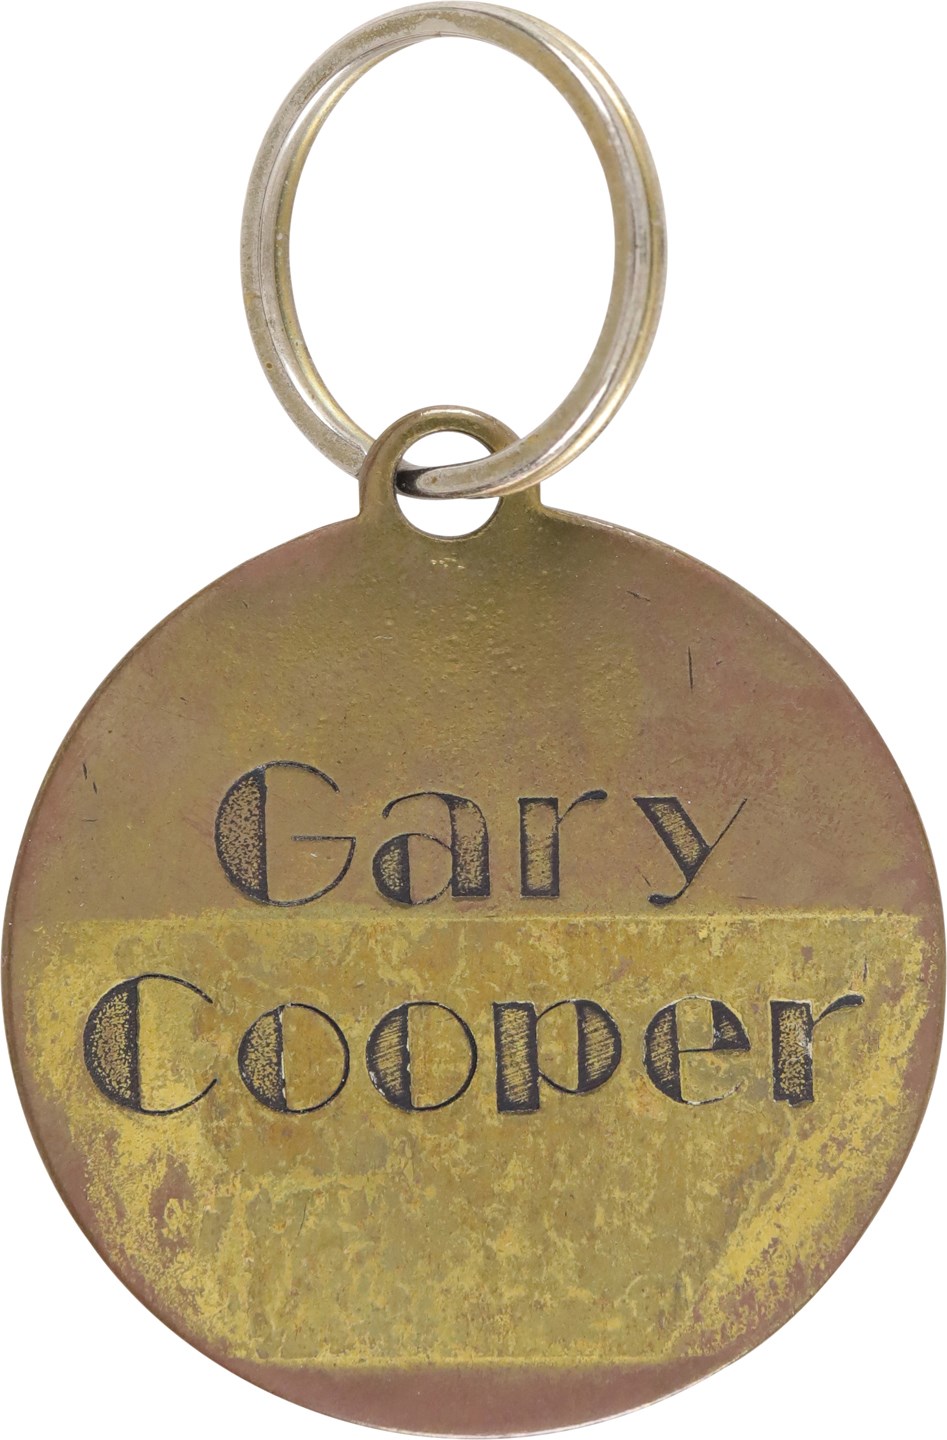 - Gary Cooper Paramount Pictures Key Fob